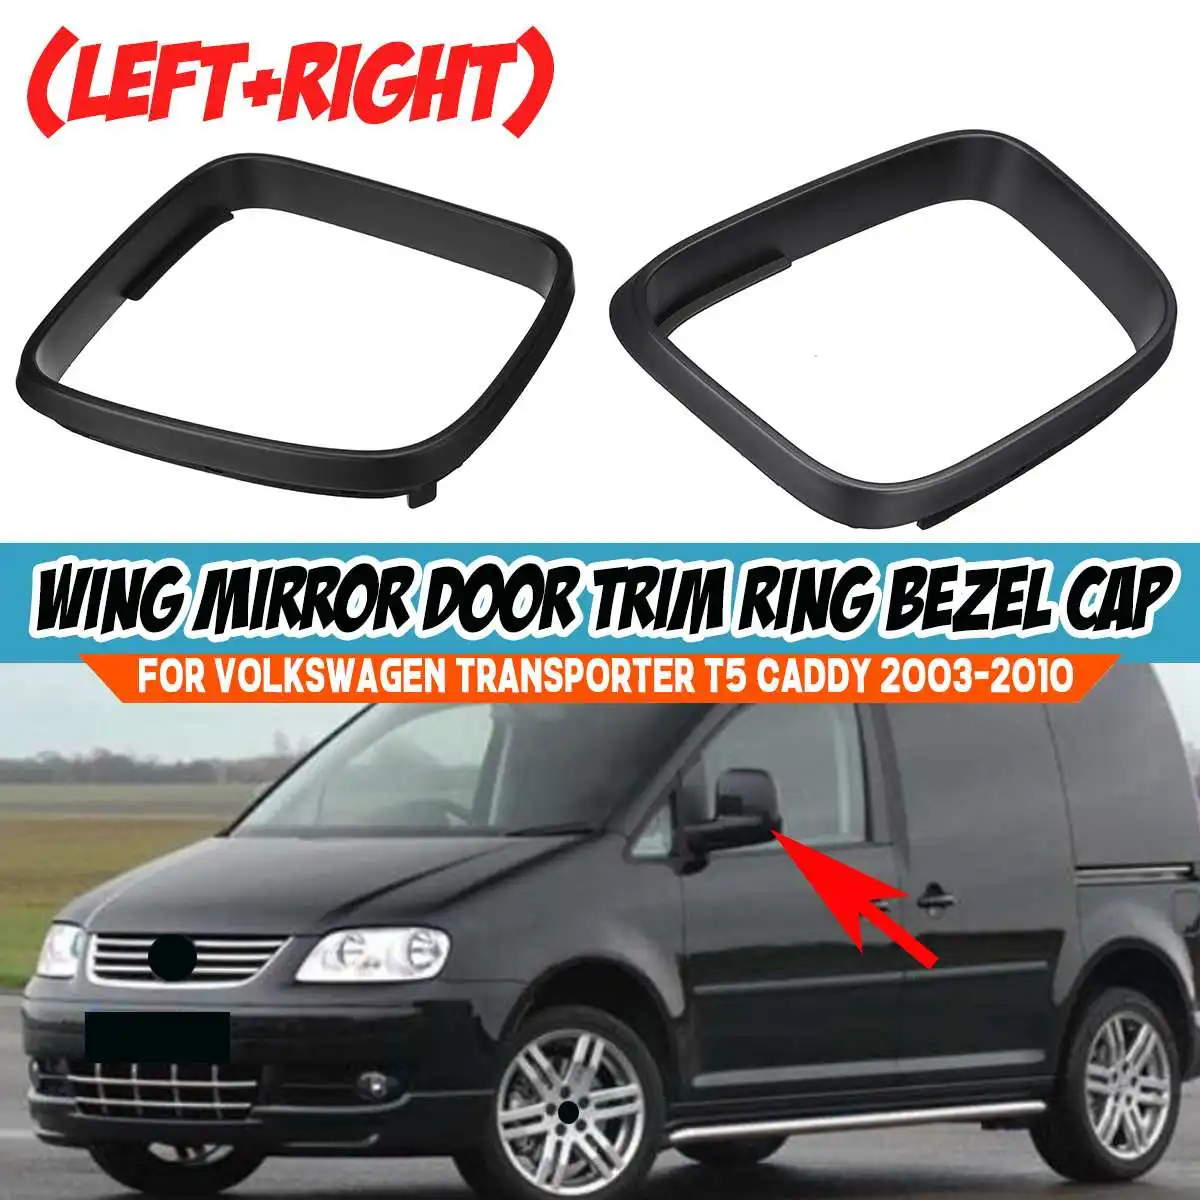 

Left/Right Car Side Wing Rear View Mirror Door Trim Ring Bezel Cap Cover For VW ForVolkswagen For Transporter T5 Caddy 2003-2010